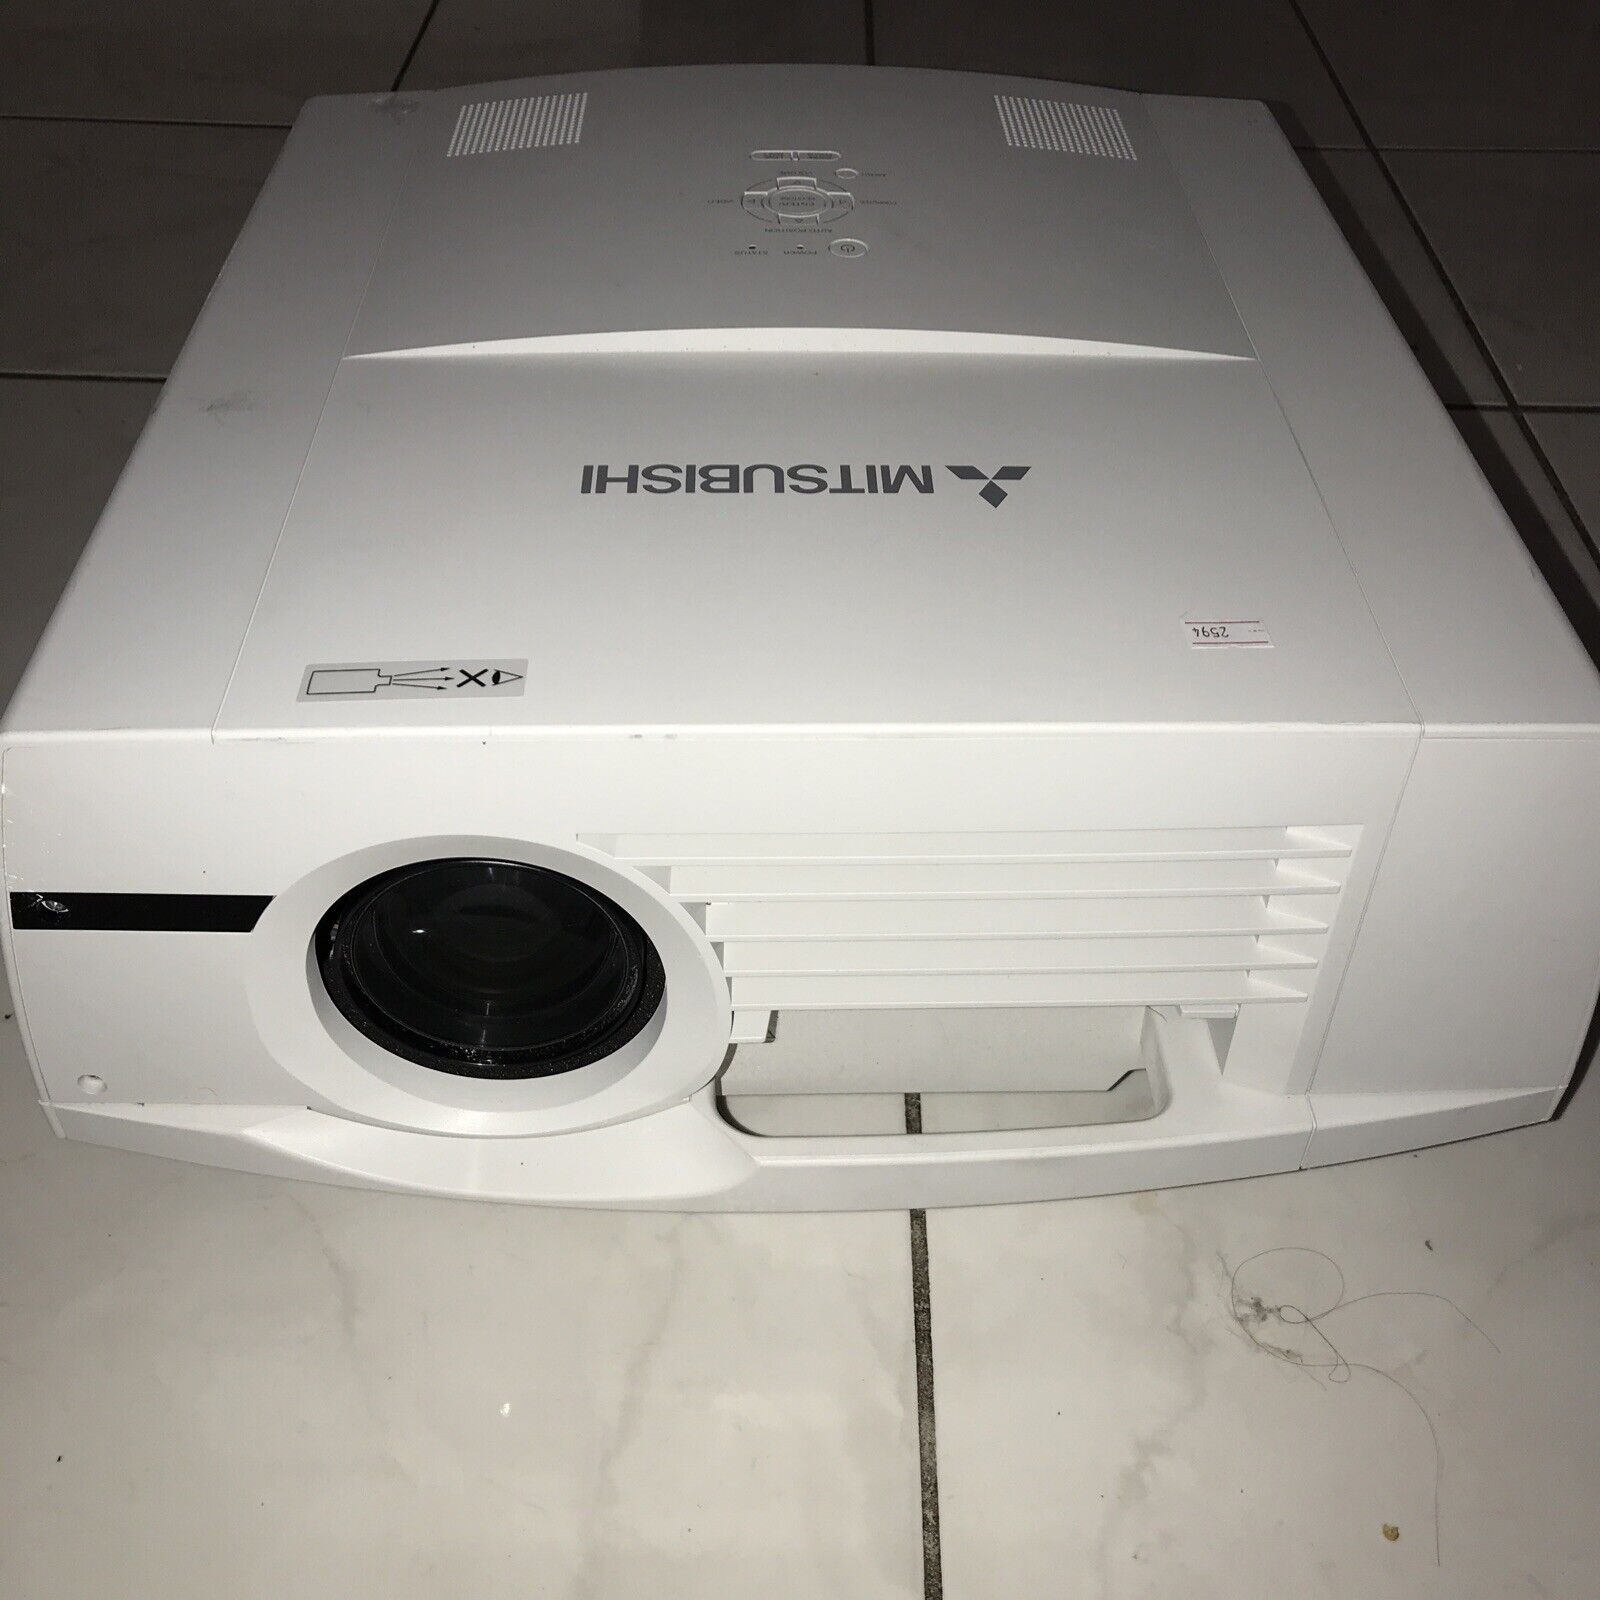 Mitsubishi FL7000U HD 1080P Home/office PROJECTOR,5K LUMENS,LOW HOUR Tested